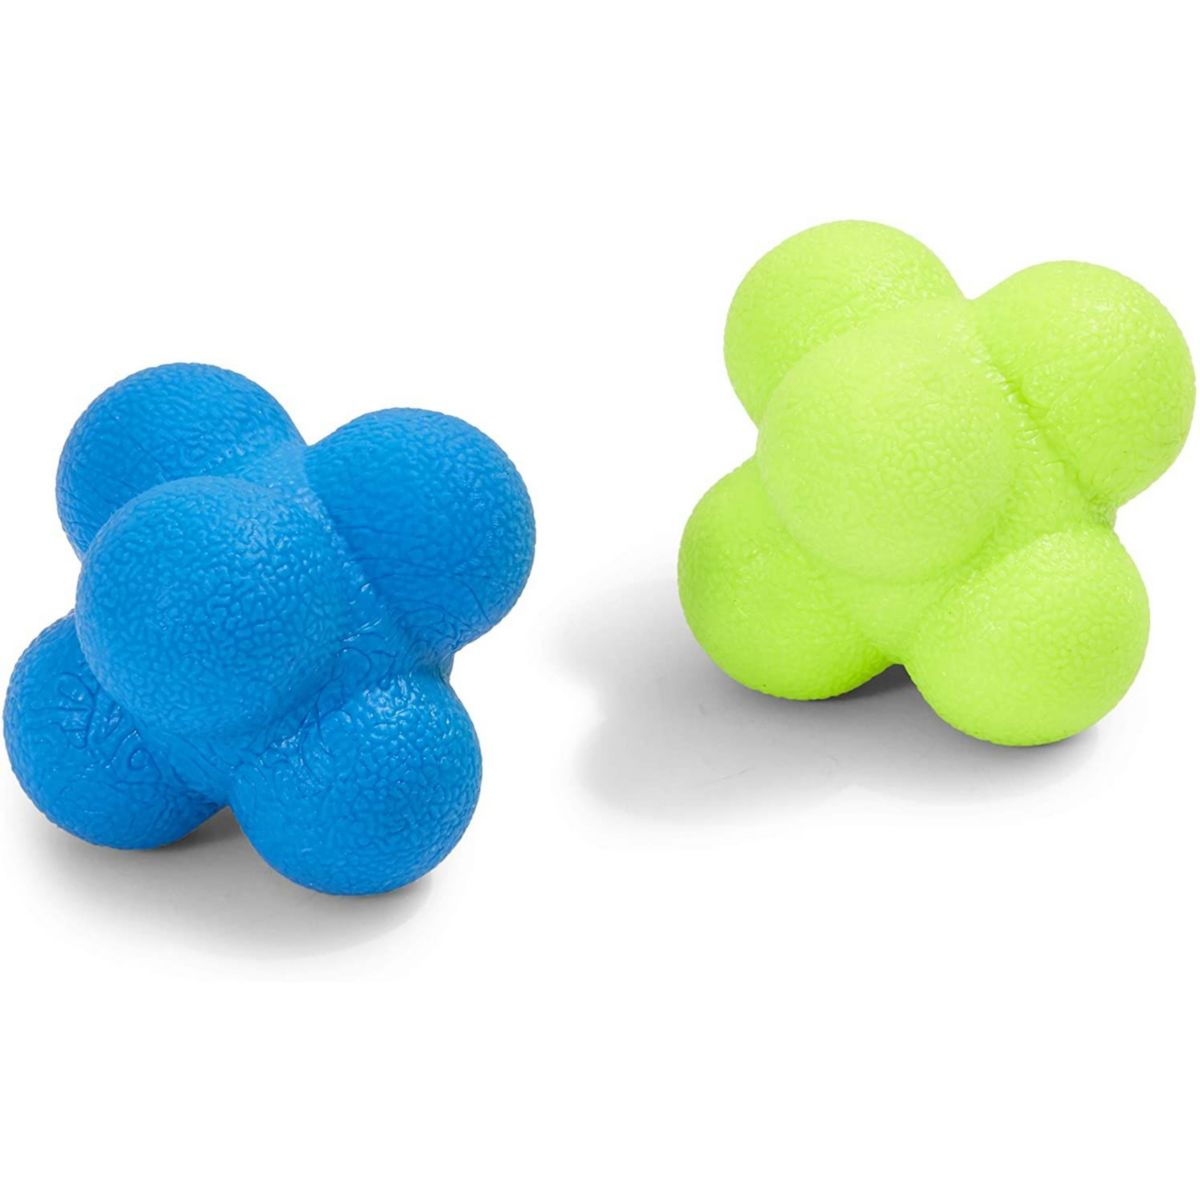 Rubber Reaction Bounce Balls for Coordination, Agility, Speed, Reflex Training (2 Pack) Juvale